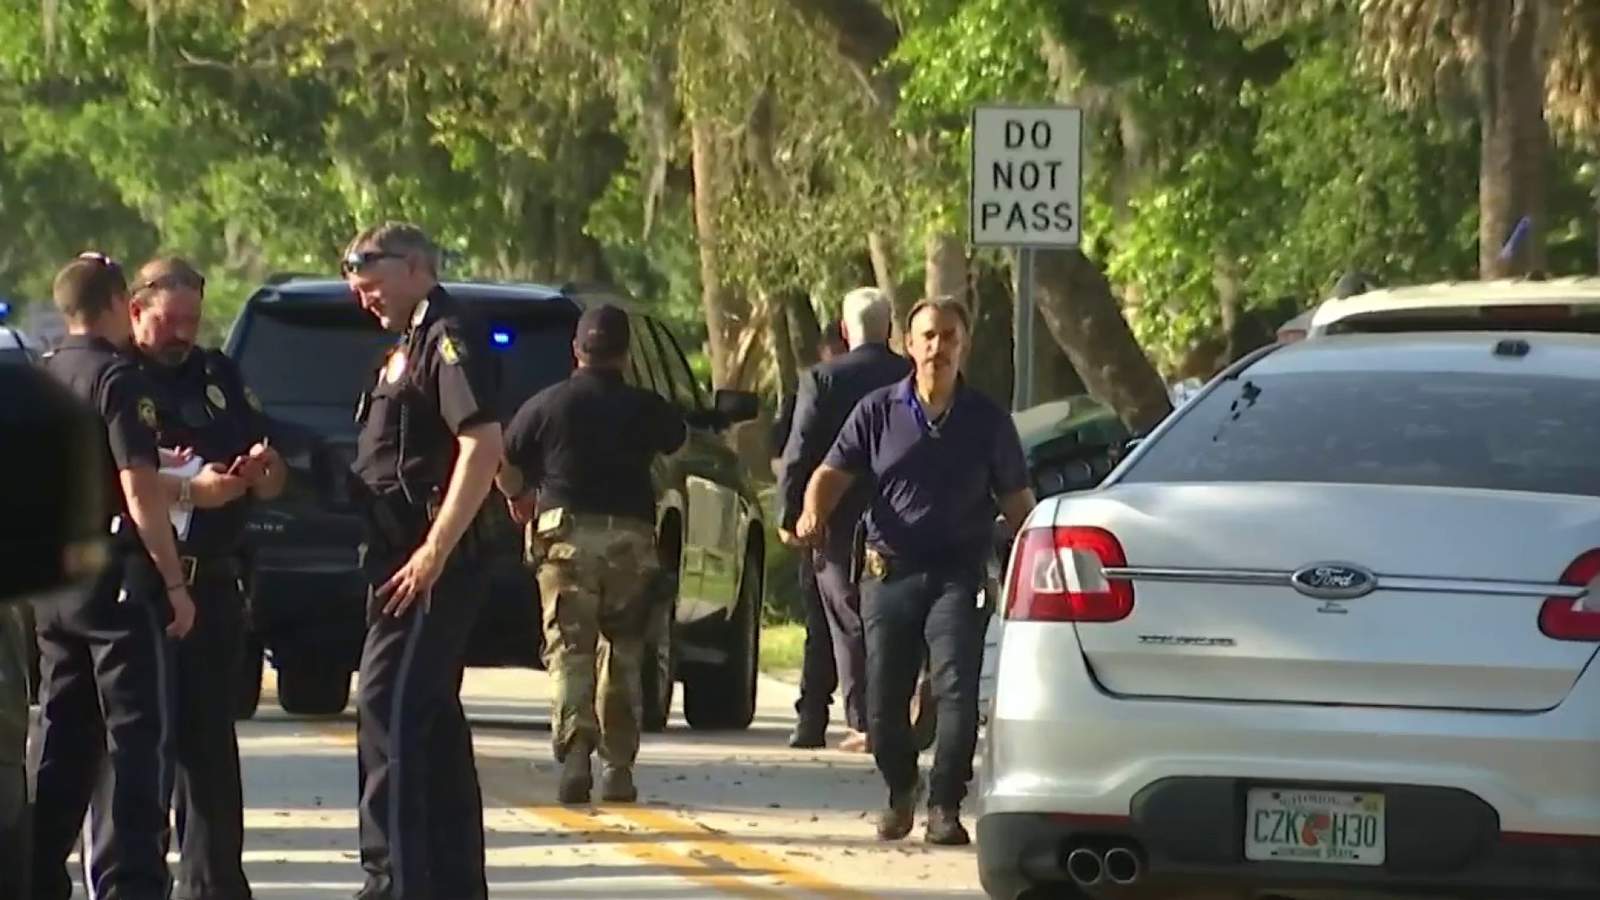 Woman killed husband and fired at Ormond Beach police before being fatally shot, officials say